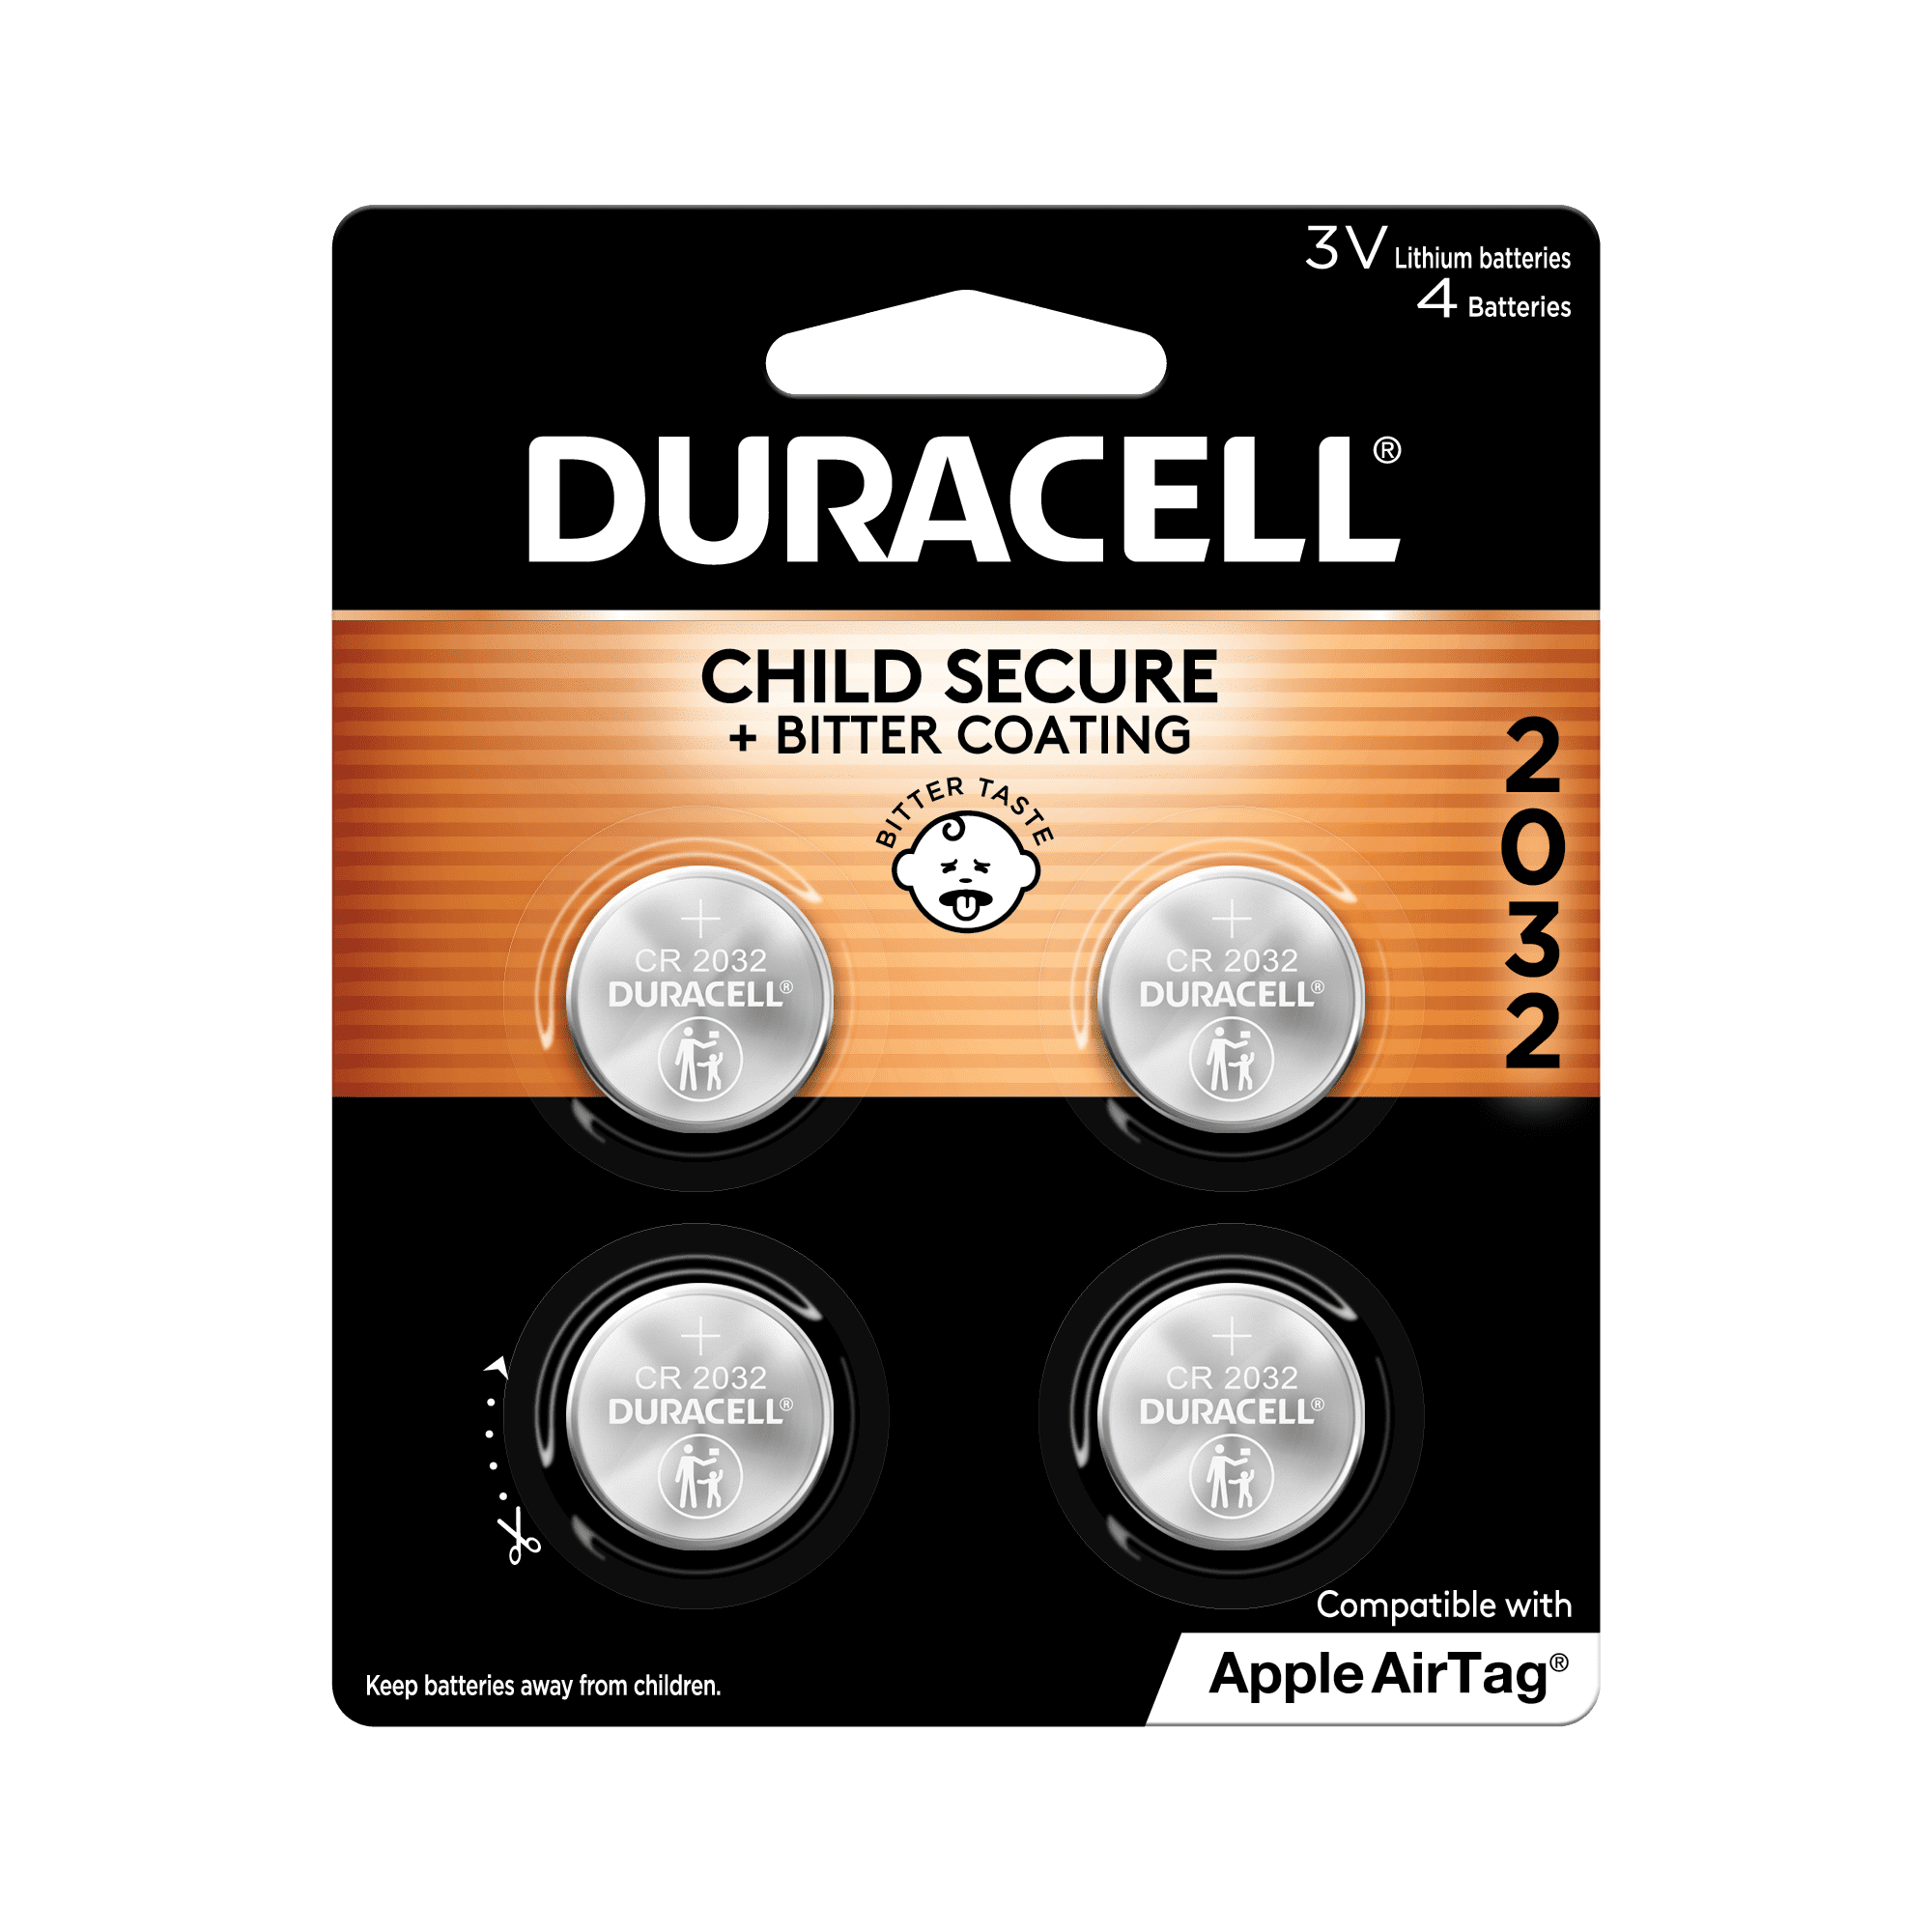 DURACELL 2032 Lithium Coin Batteries 3V (2 pack) - Up to 70% Extra